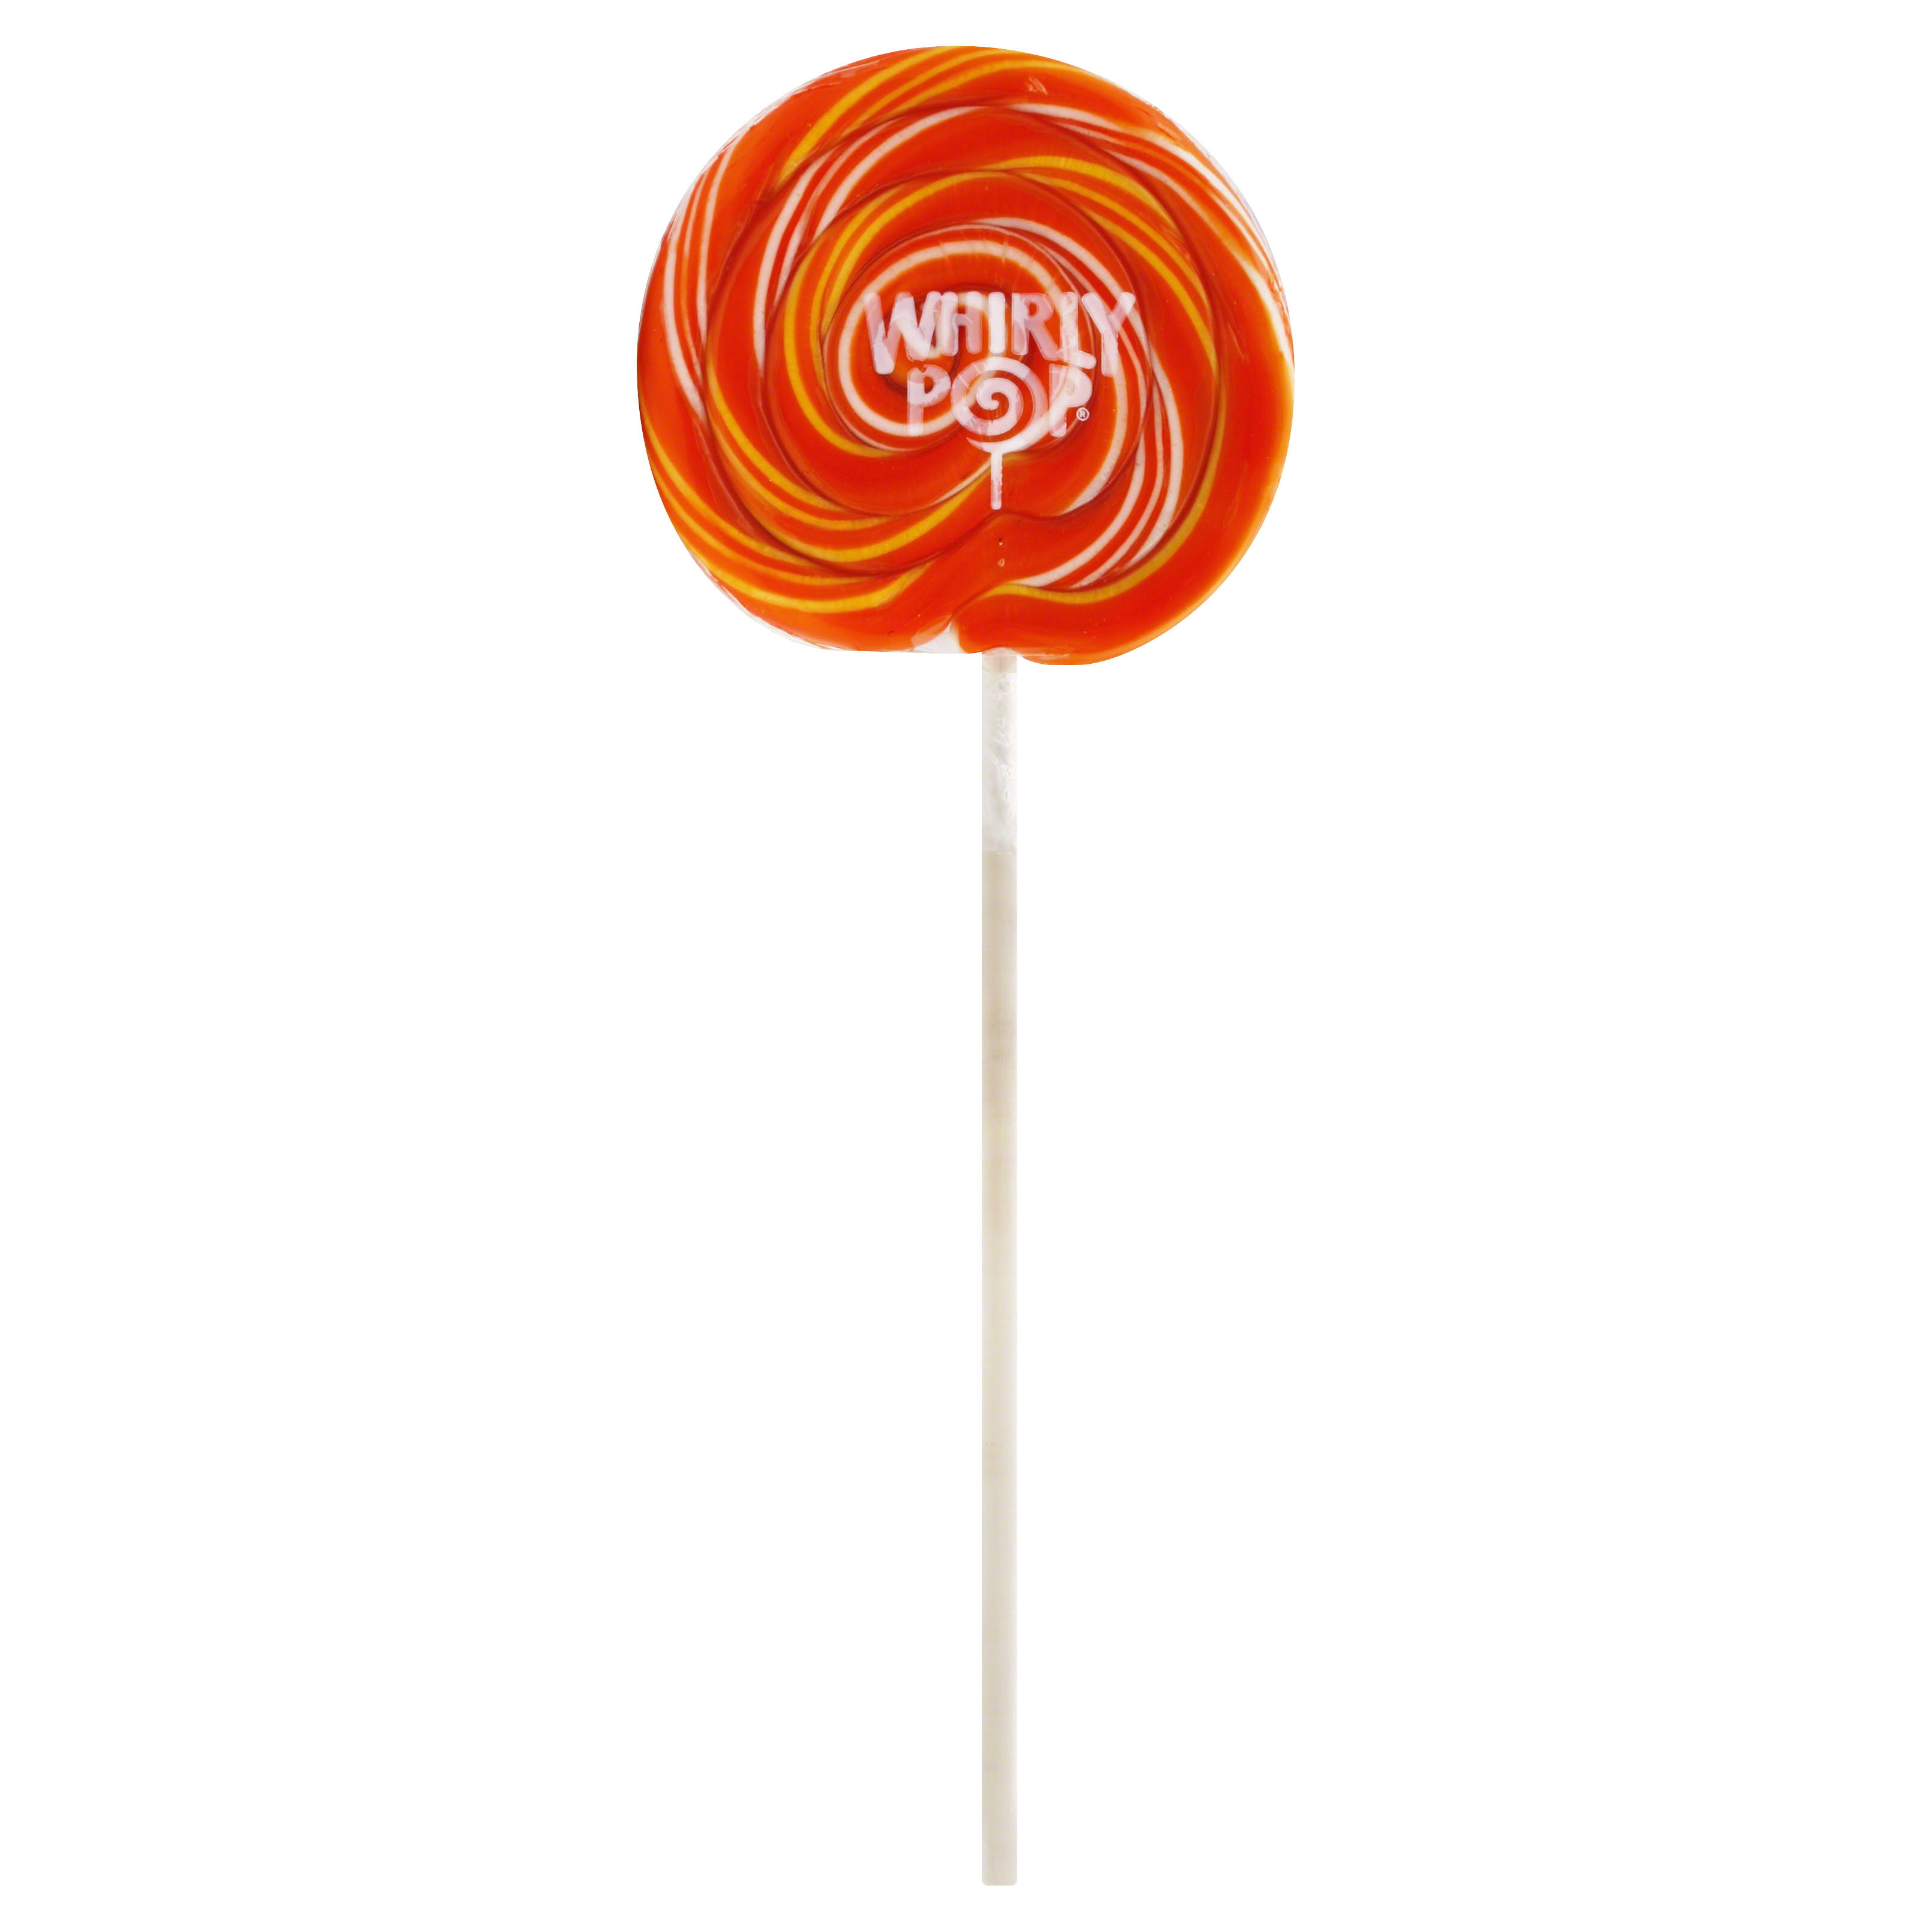 Whirly Pop Candy - 6 oz